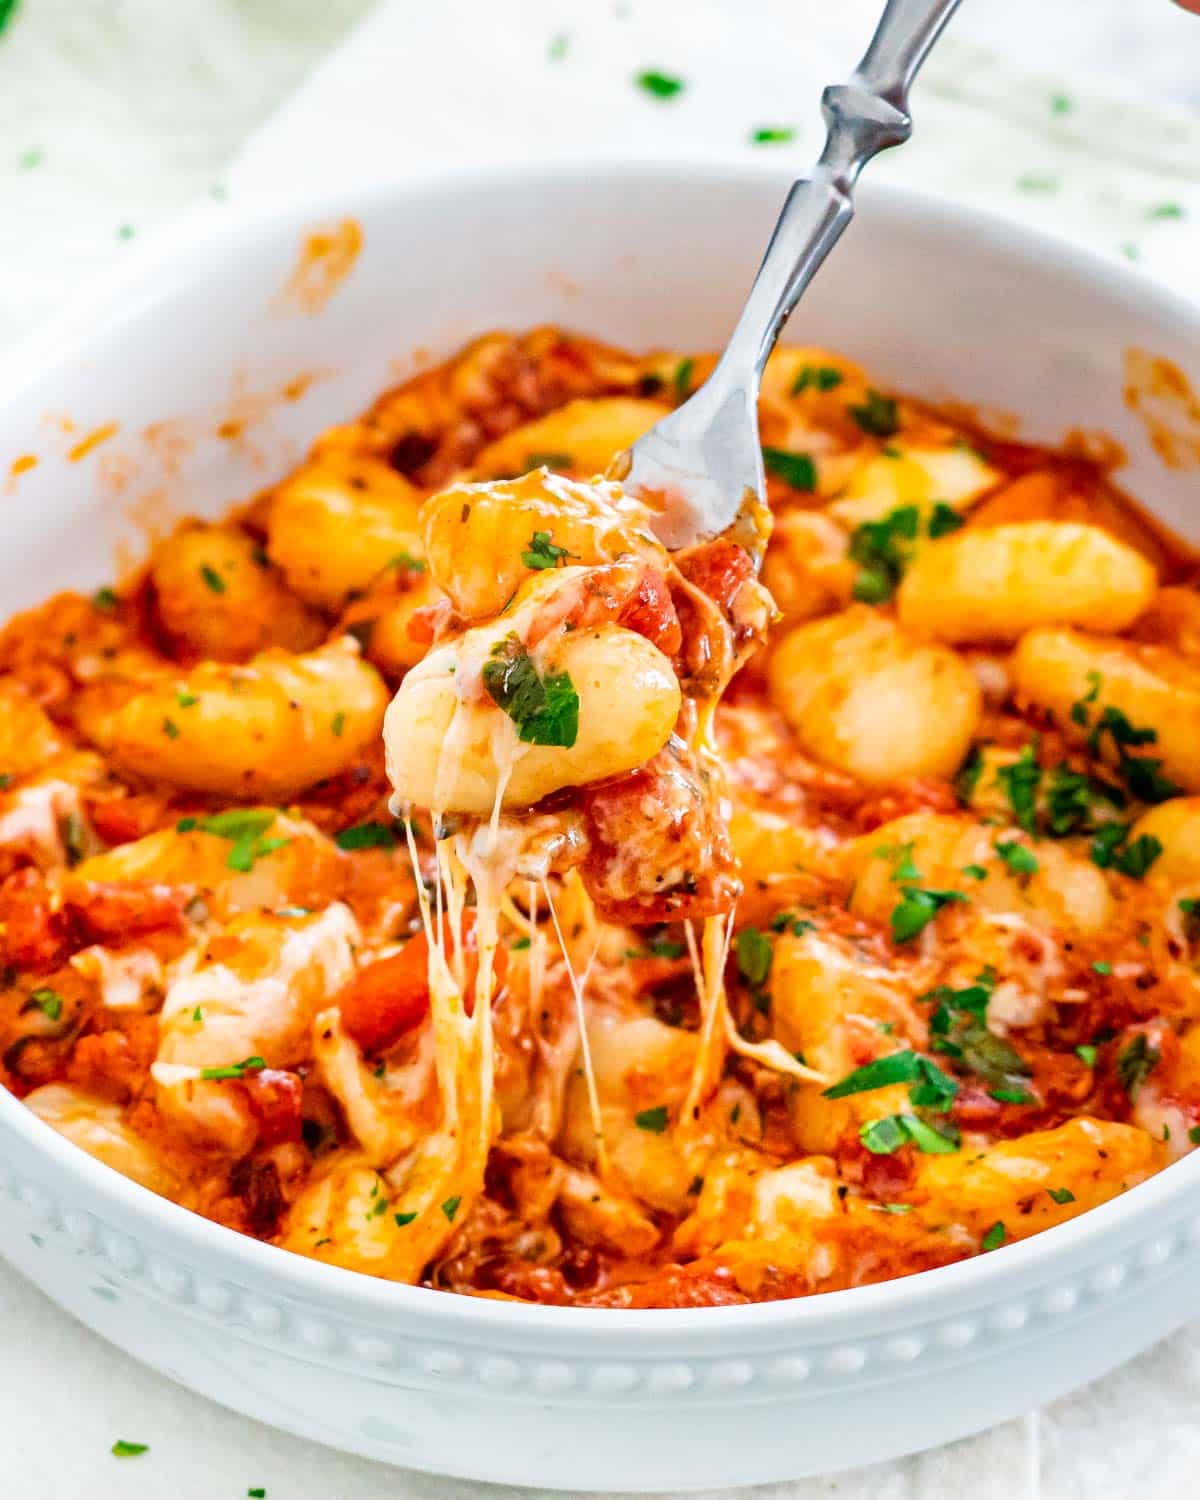 a fork holding gnocchi in sauce over a plate loaded with cheesy gnocchi bake